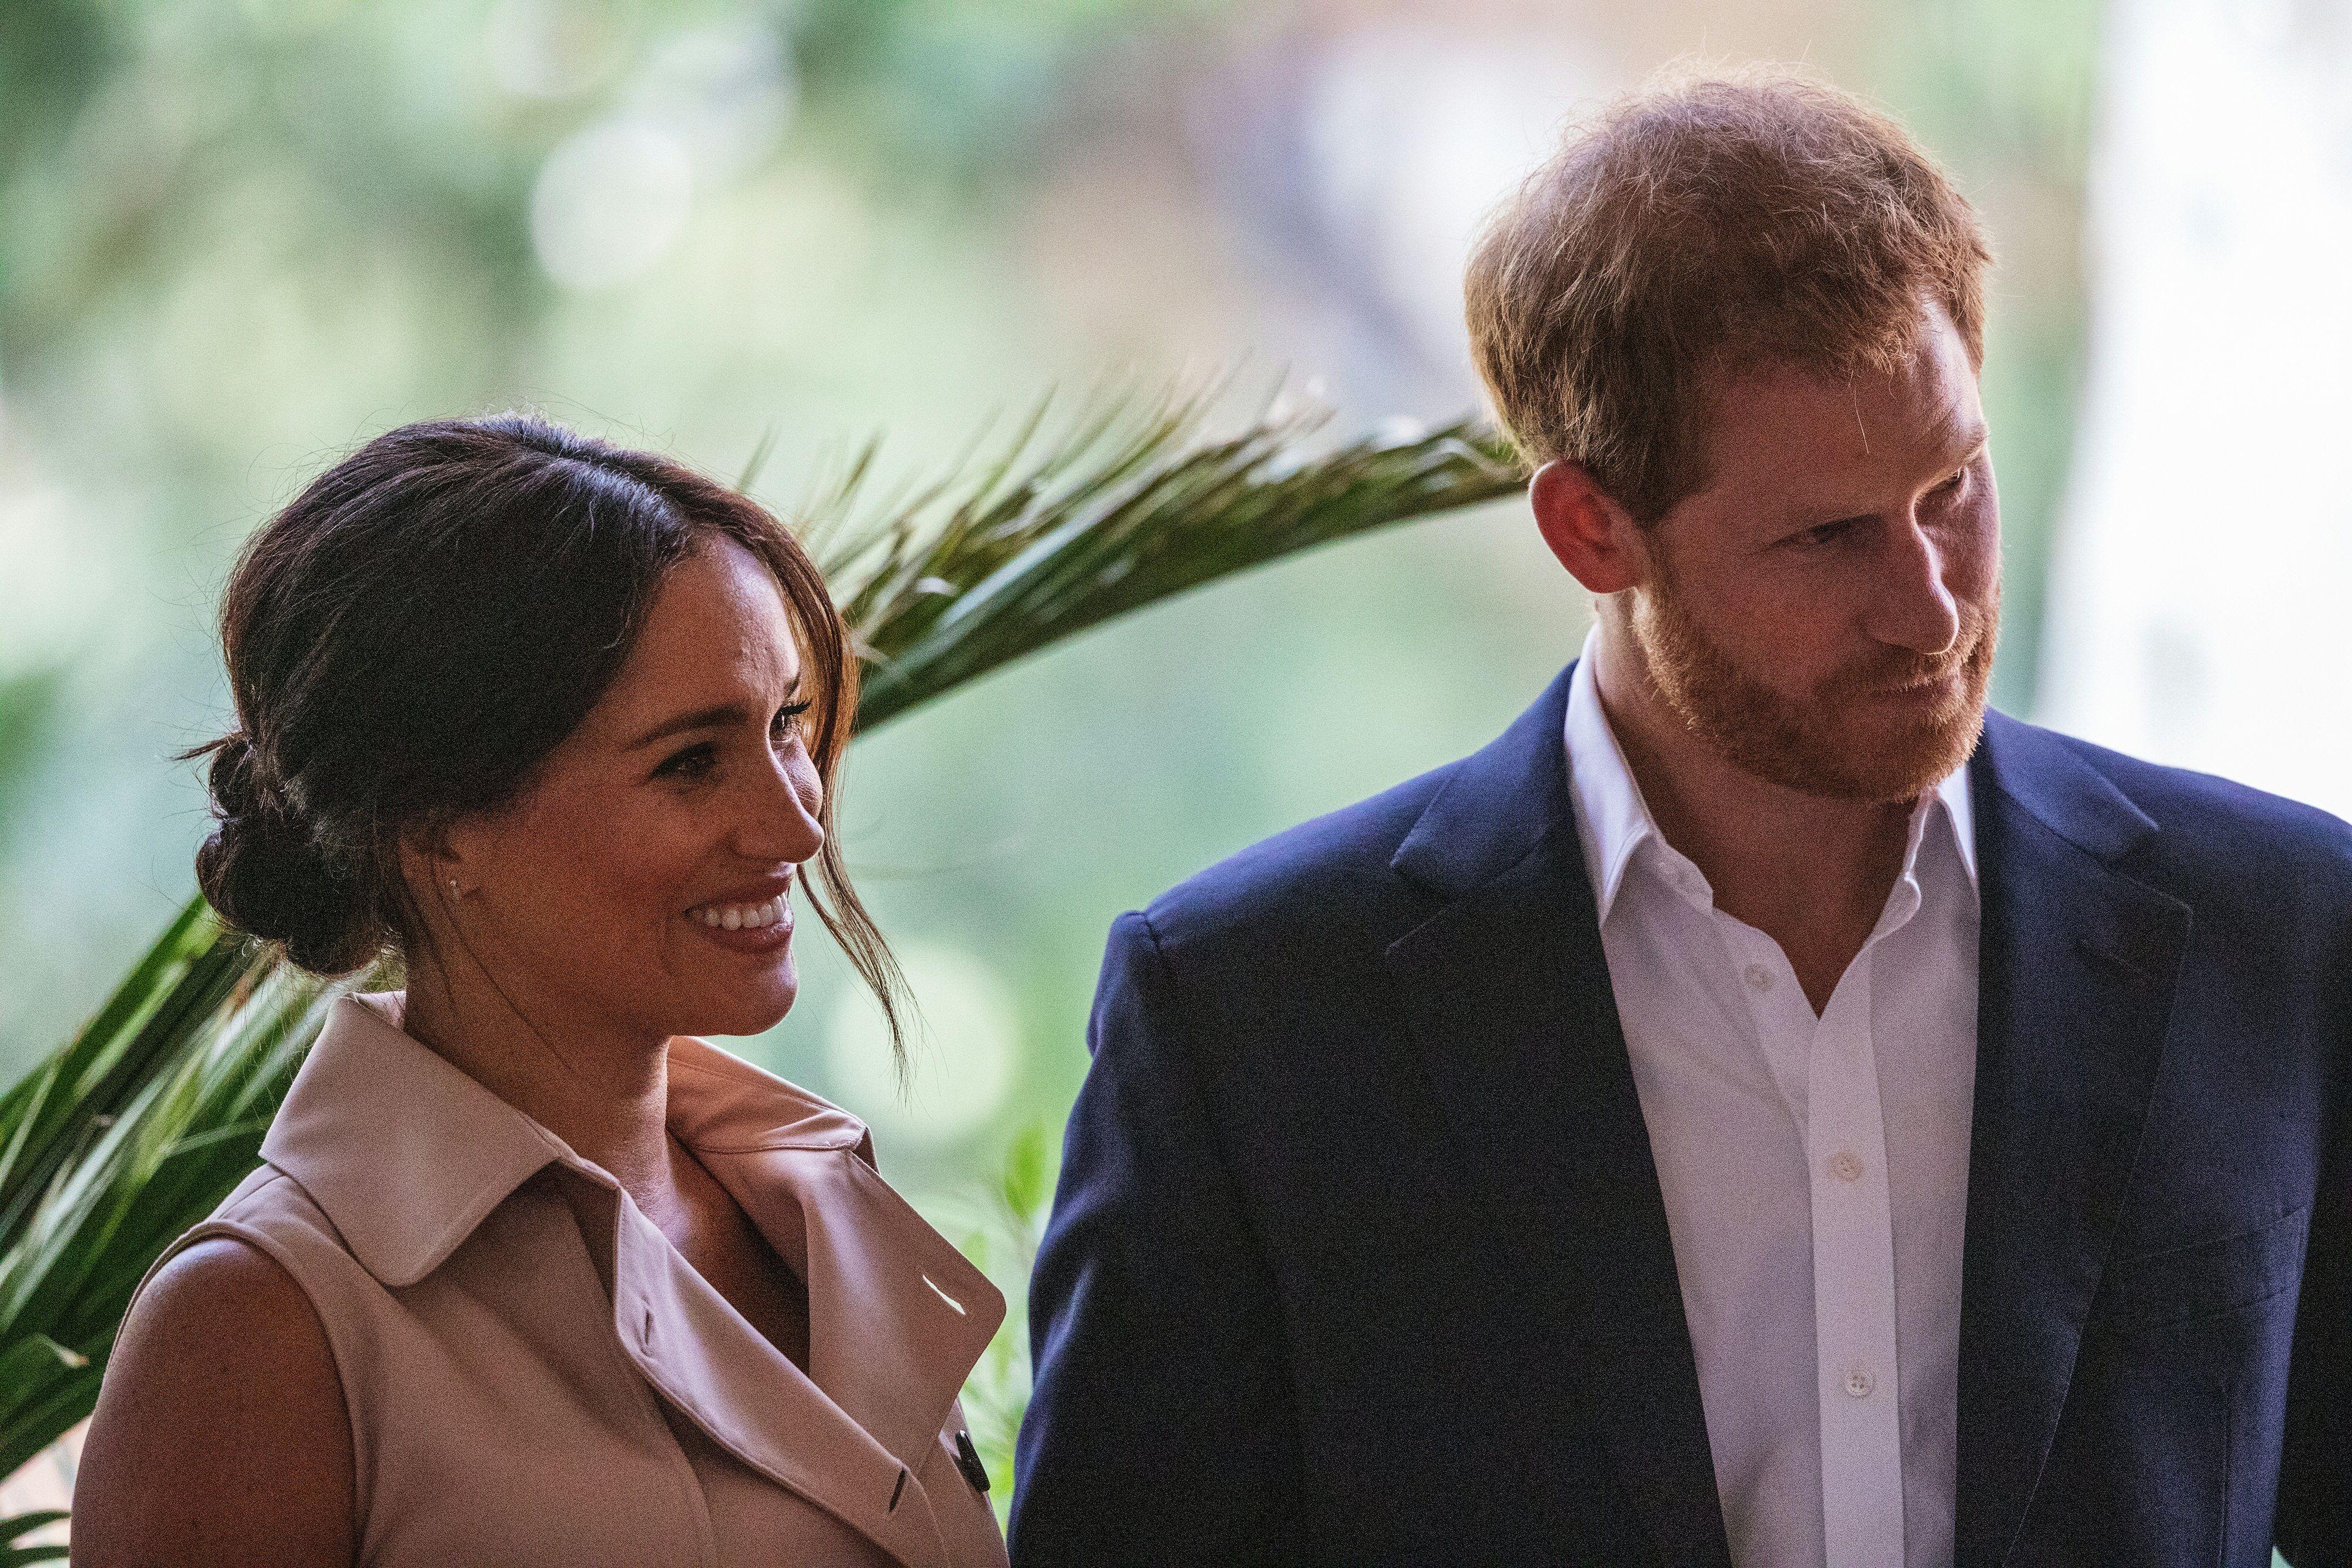 Did Queen Elizabeth Subtly State that Prince Harry and Meghan Markle Will Lose Their Titles?